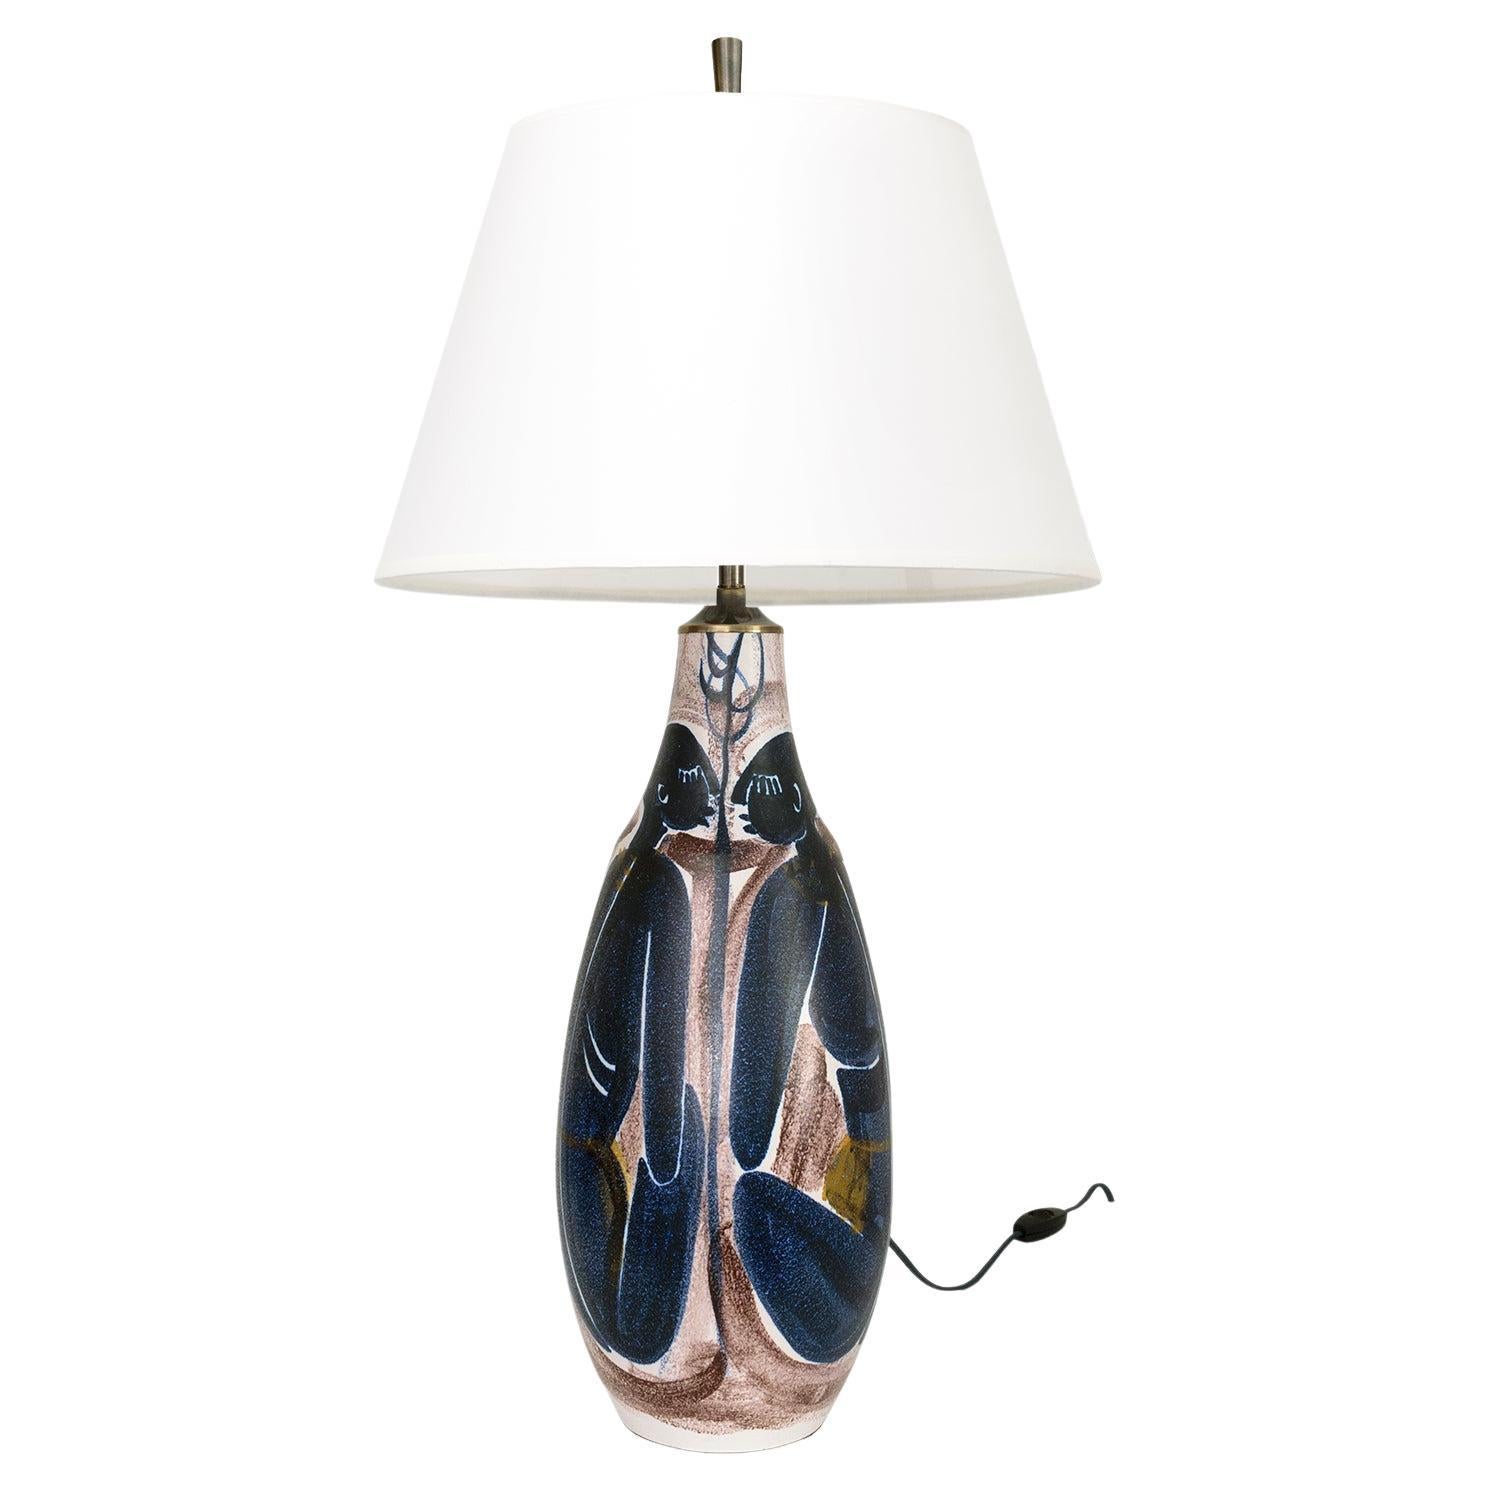 Mette Doller Hand Painted Lamp with 4 Women for Hoganas, Sweden For Sale